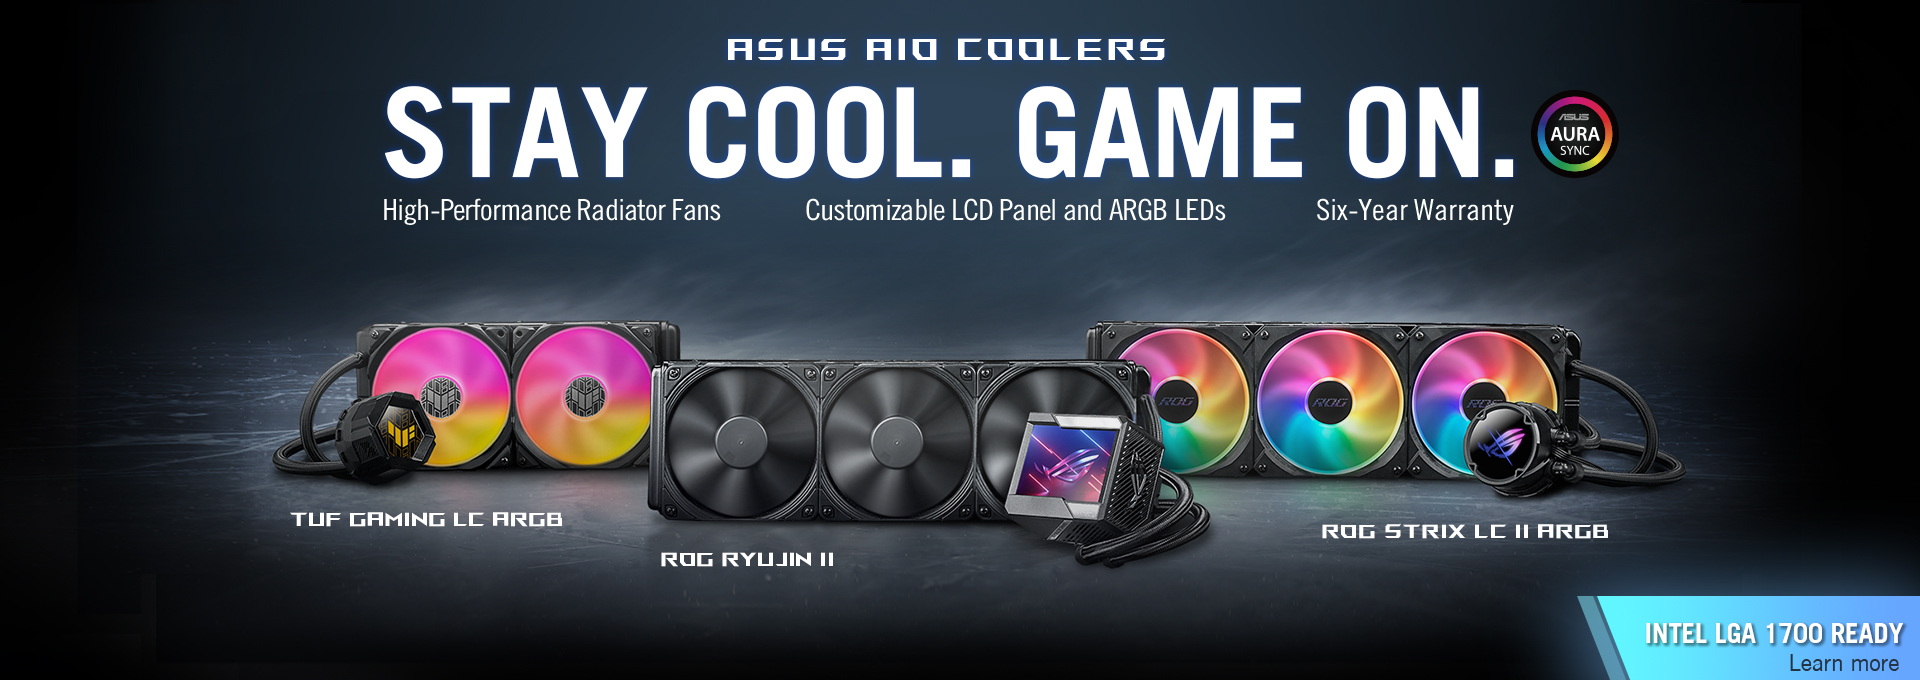 ASUS AIO Kühler - Stay Cool. Game On.